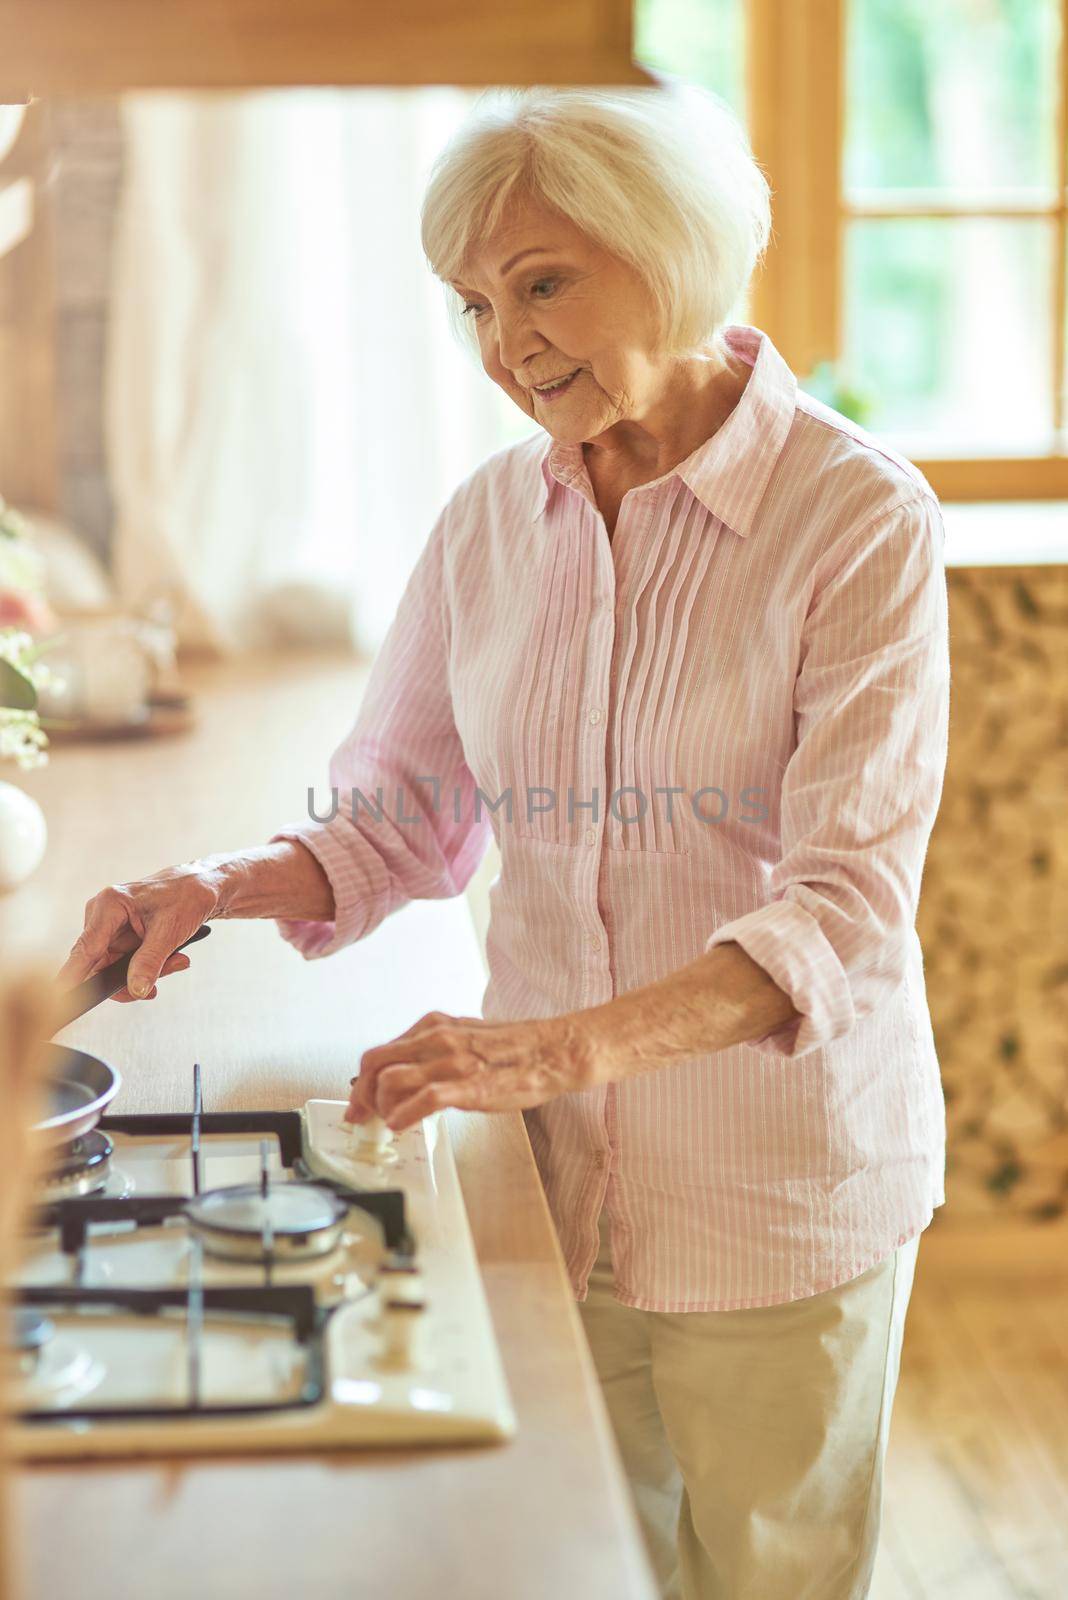 Smiling senior woman turning on the stove and setting the frying pan to make breakfast at home. Domestic lifestyle concept